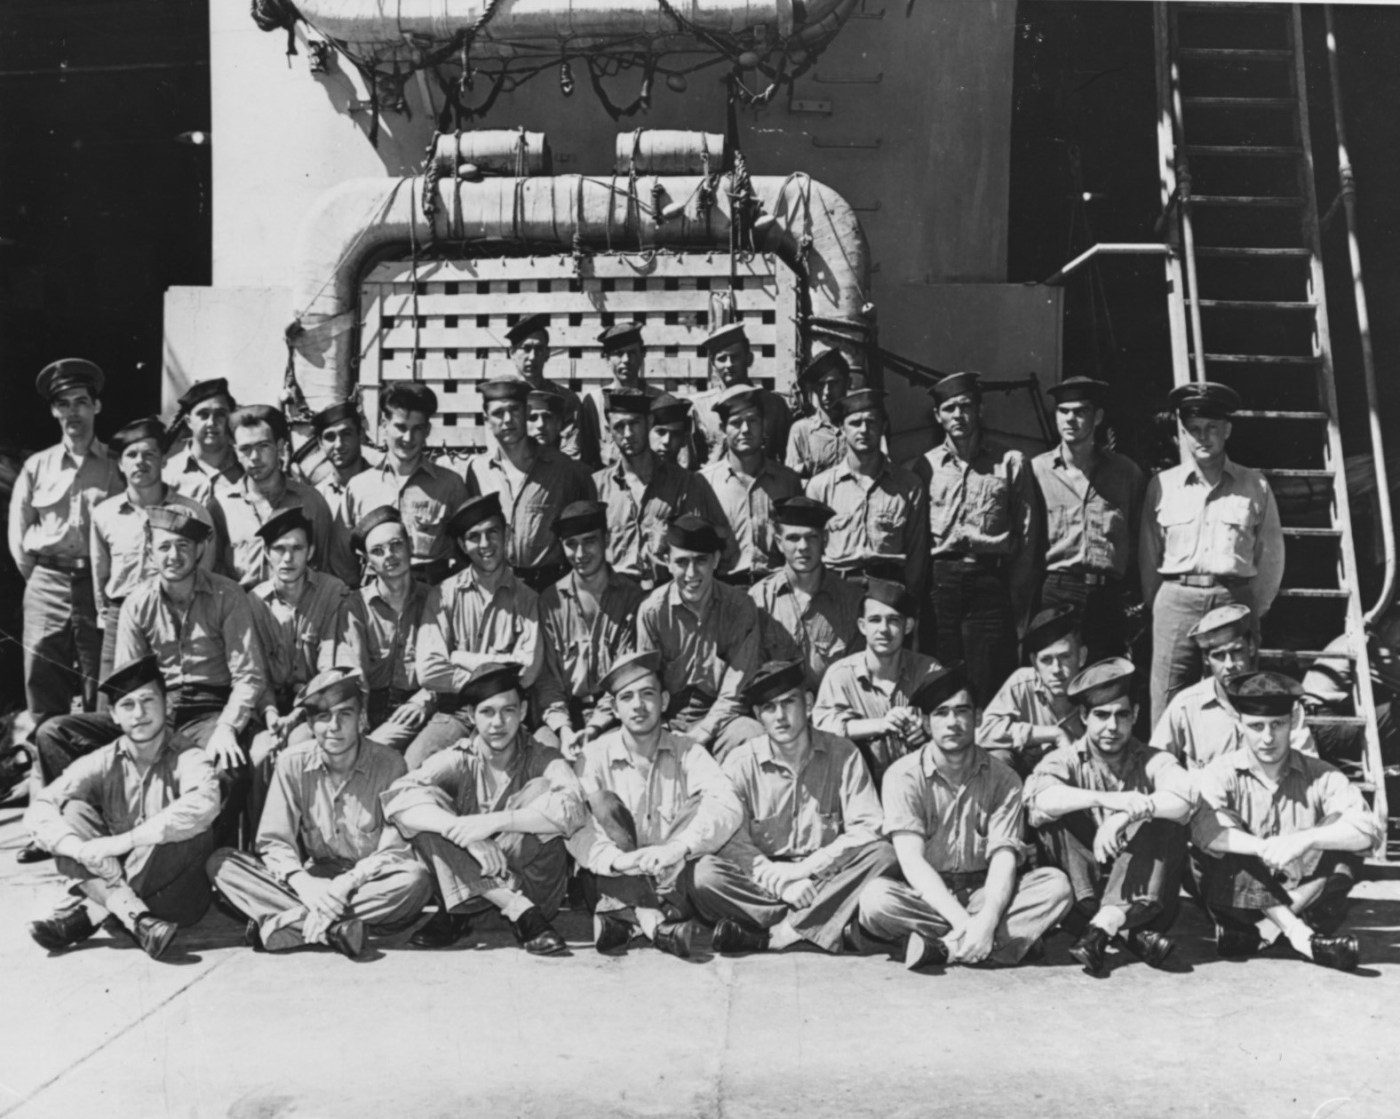 Members of the ship’s crew pose in the well deck, during World War II. Photograph was taken prior to her final overhaul, completed in July 1945. (National Archives)